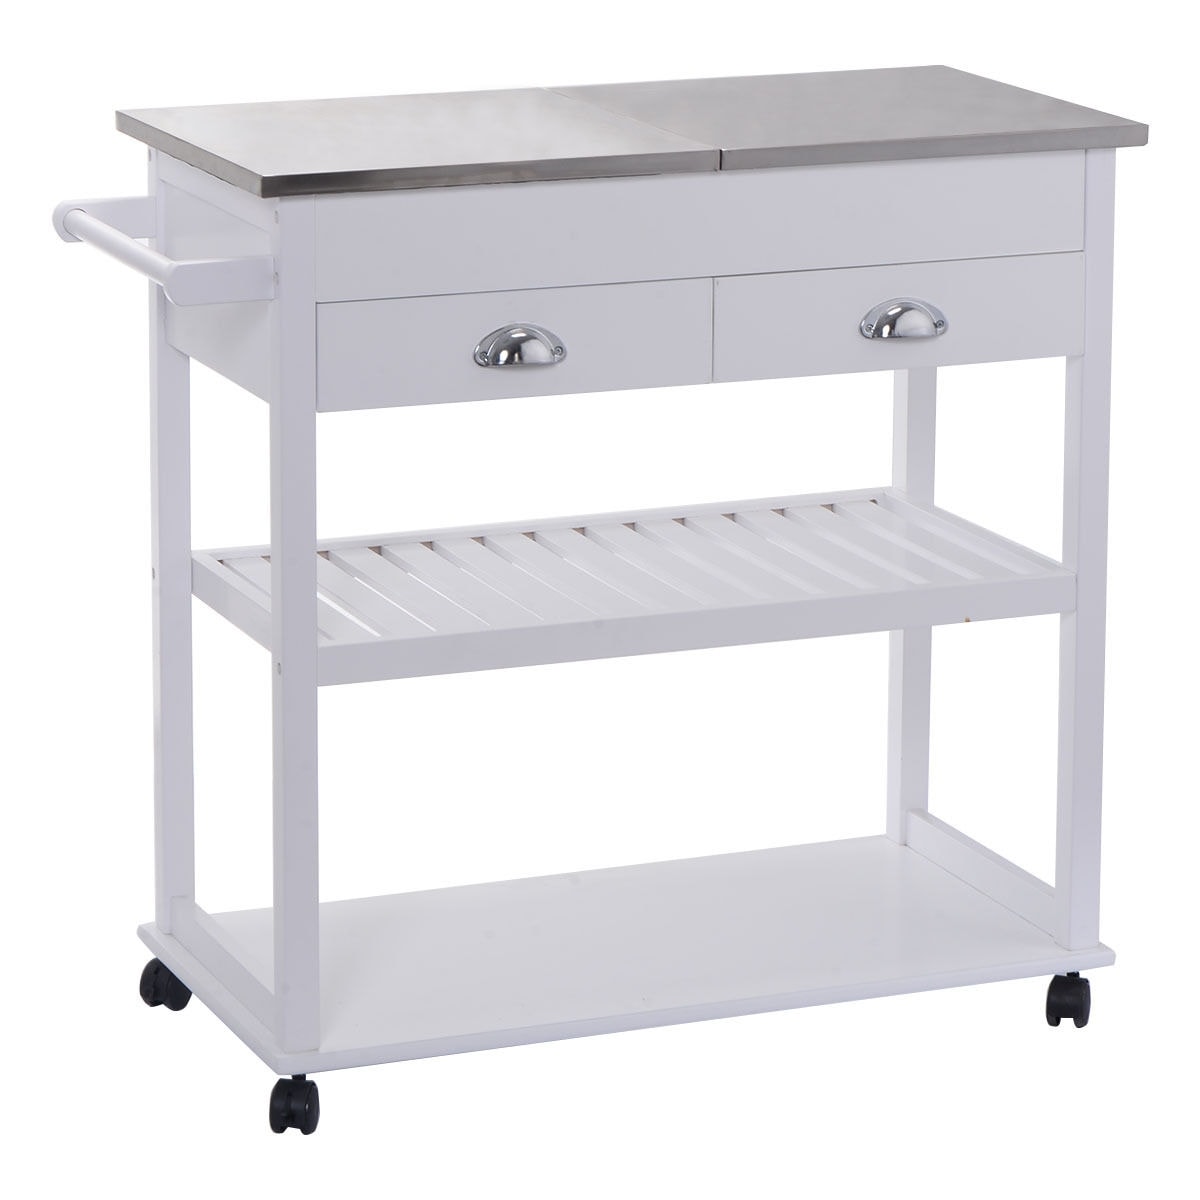 Shop Costway White Rolling Kitchen Trolley Cart Stainless Steel-Flip Rolling Kitchen Cart With Stainless Steel Top